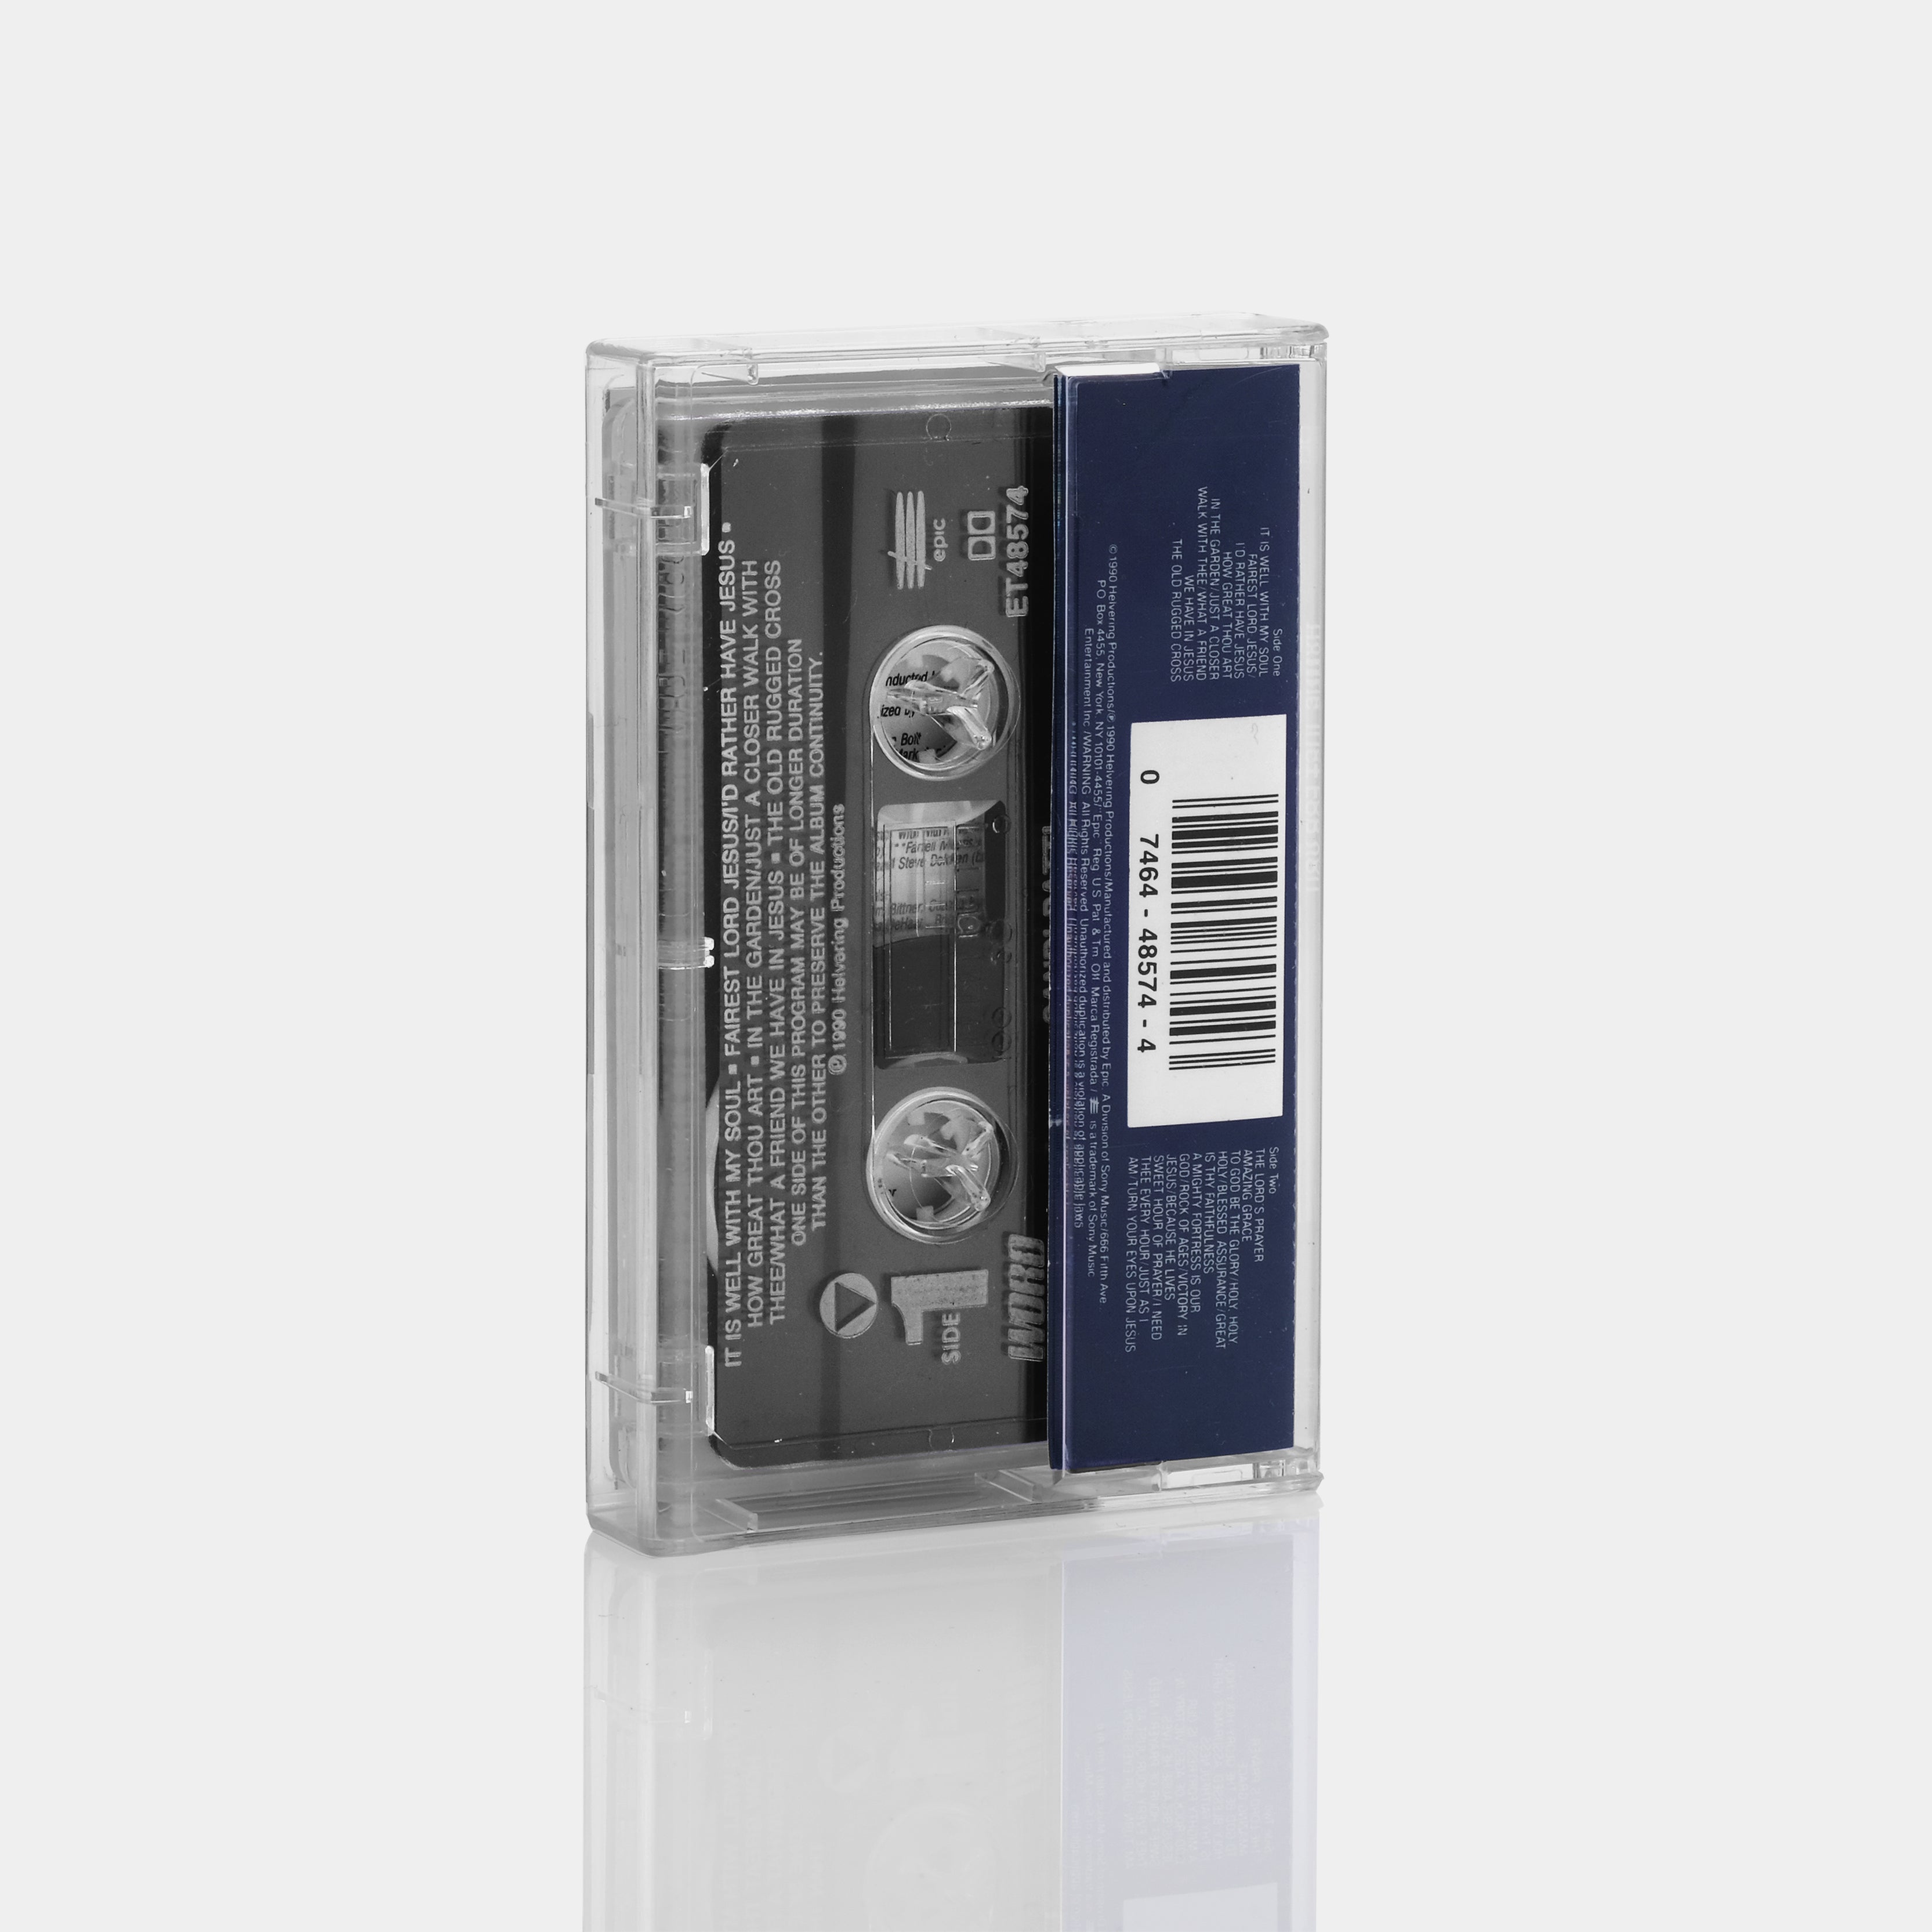 Sandi Patti - Hymns Just For You Cassette Tape